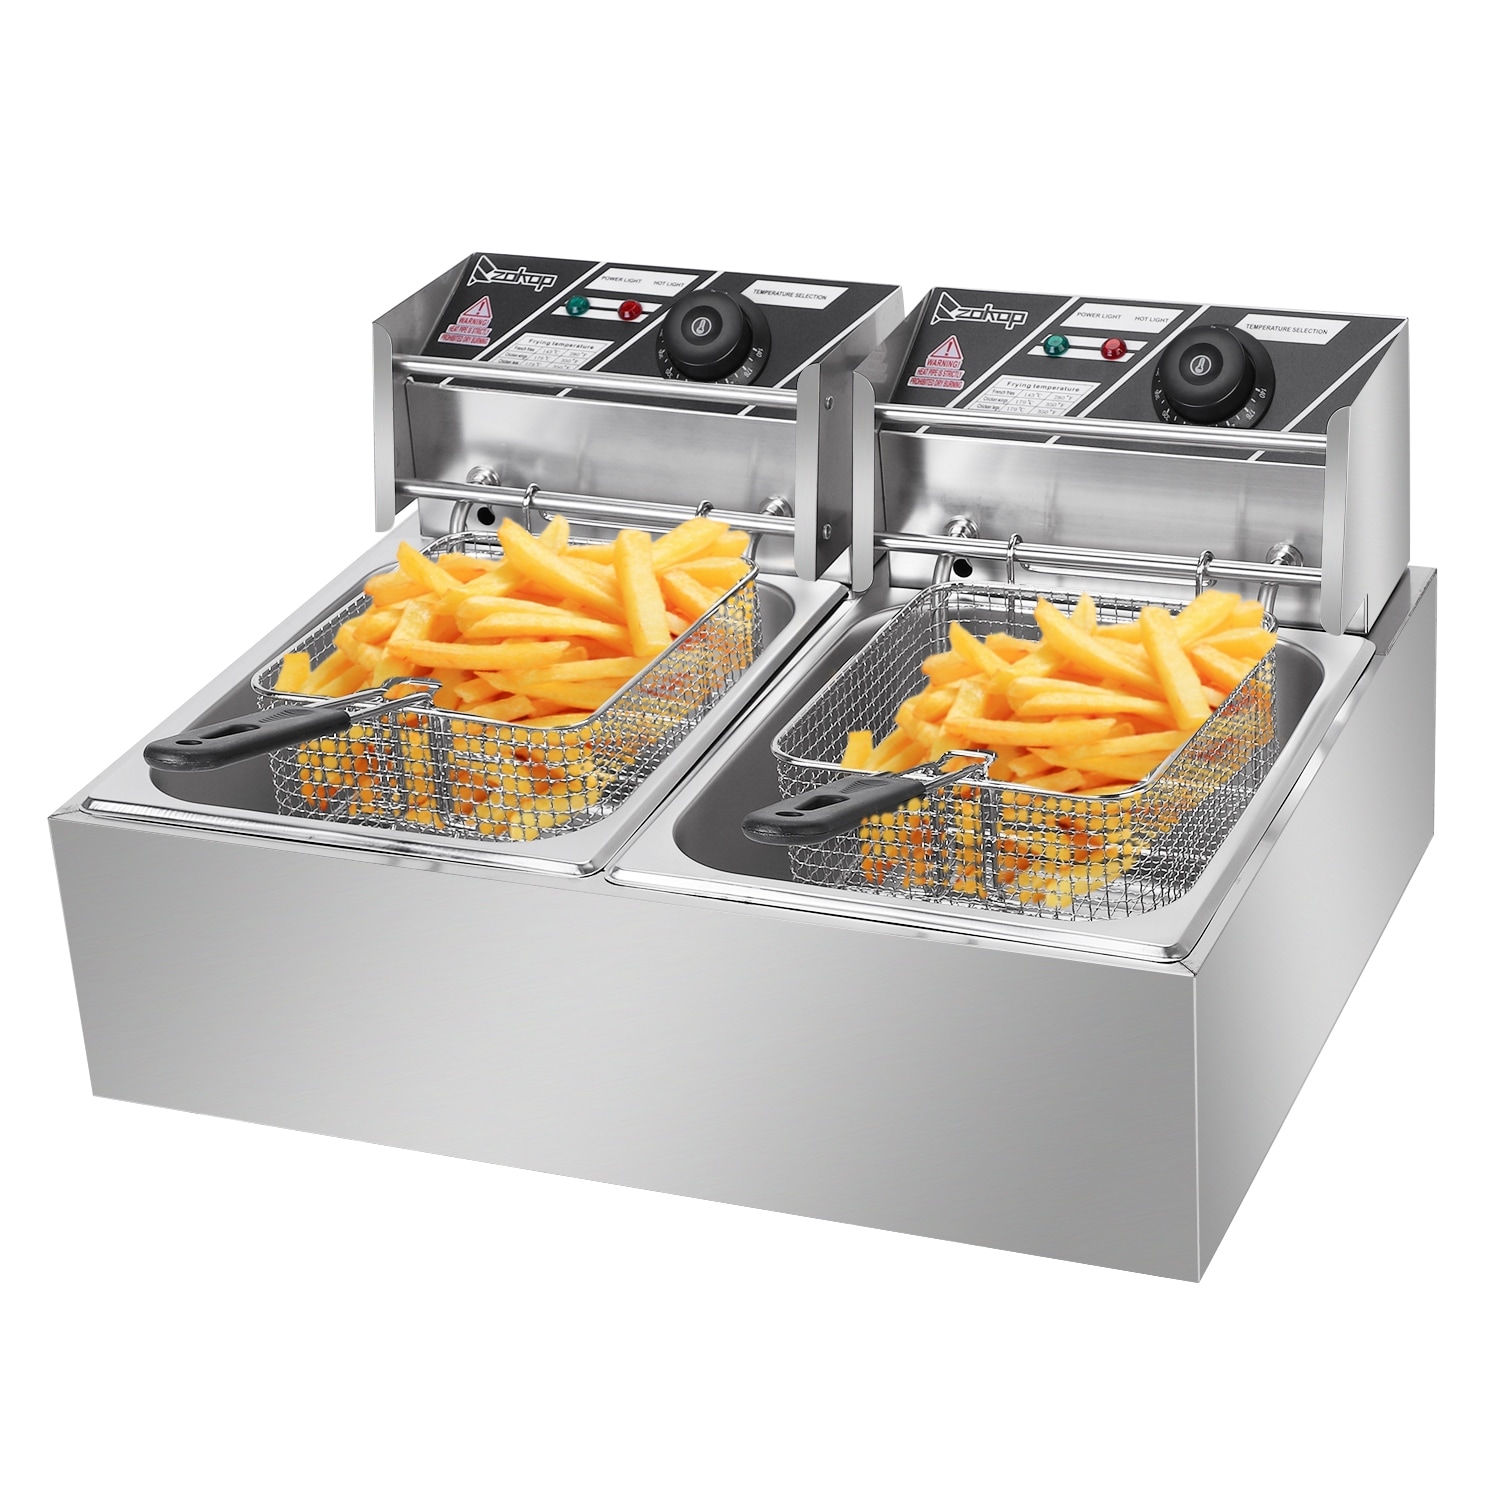 Electric Deep Fryer electric fryer single-cylinder large capacity